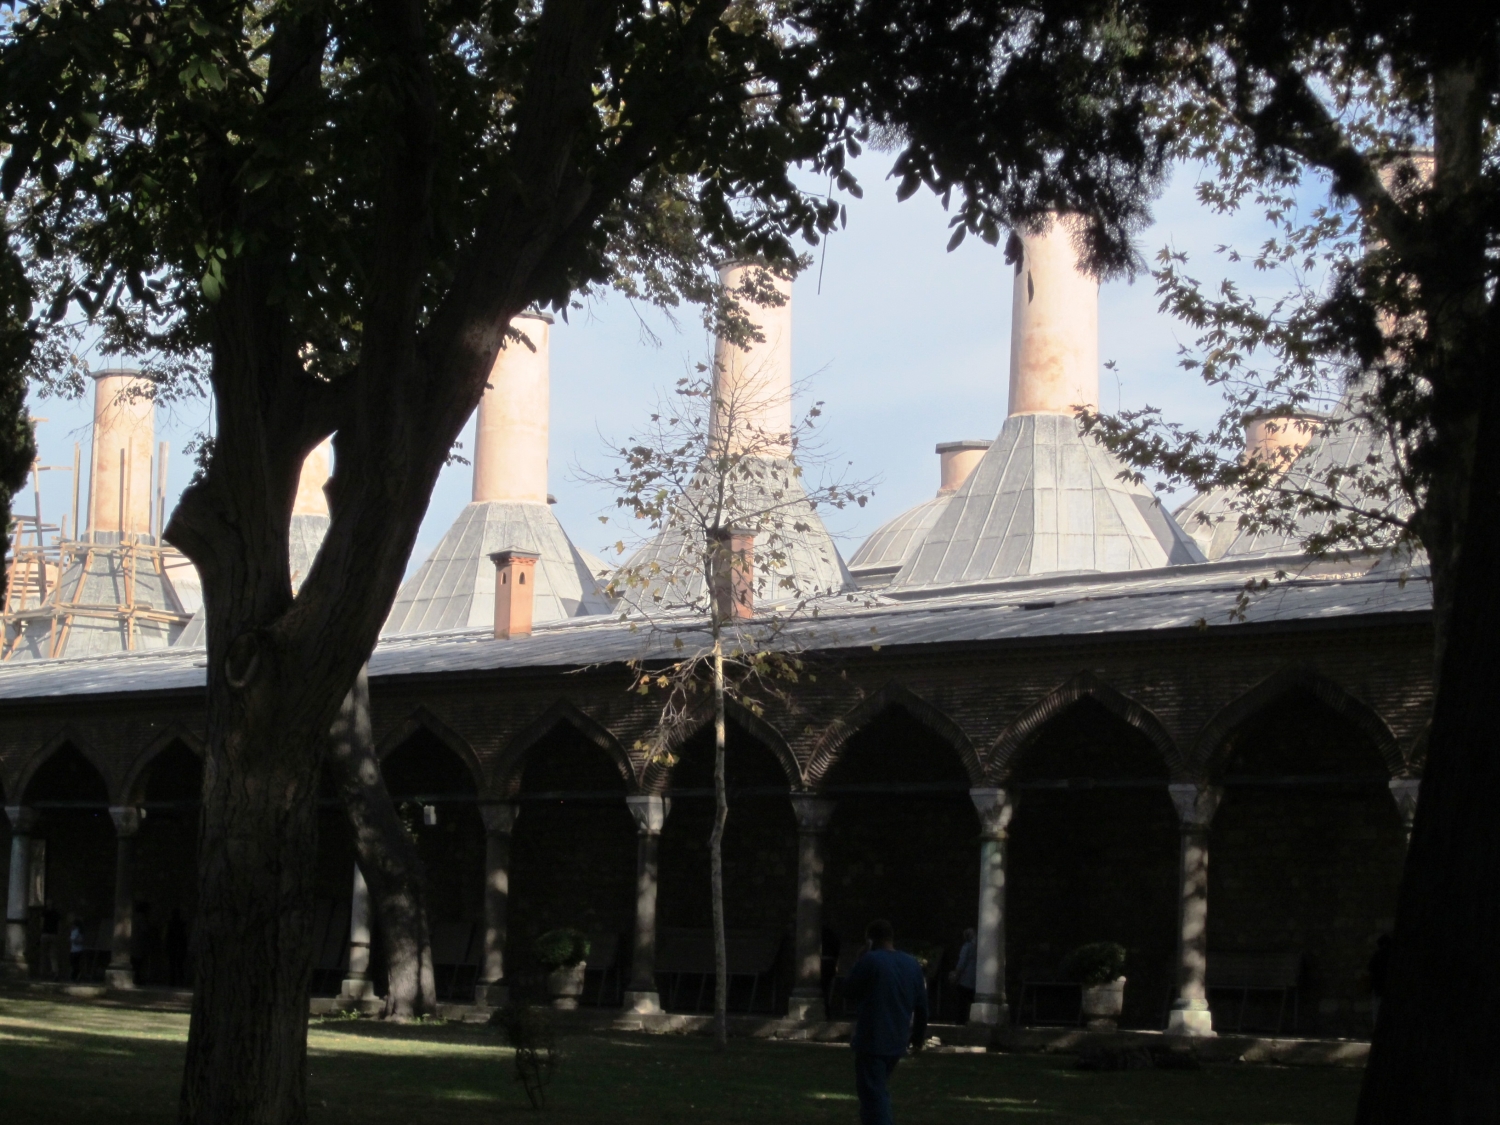 Royal Kitchens - Chimneys of the palace kitchens, seen from the Second Court